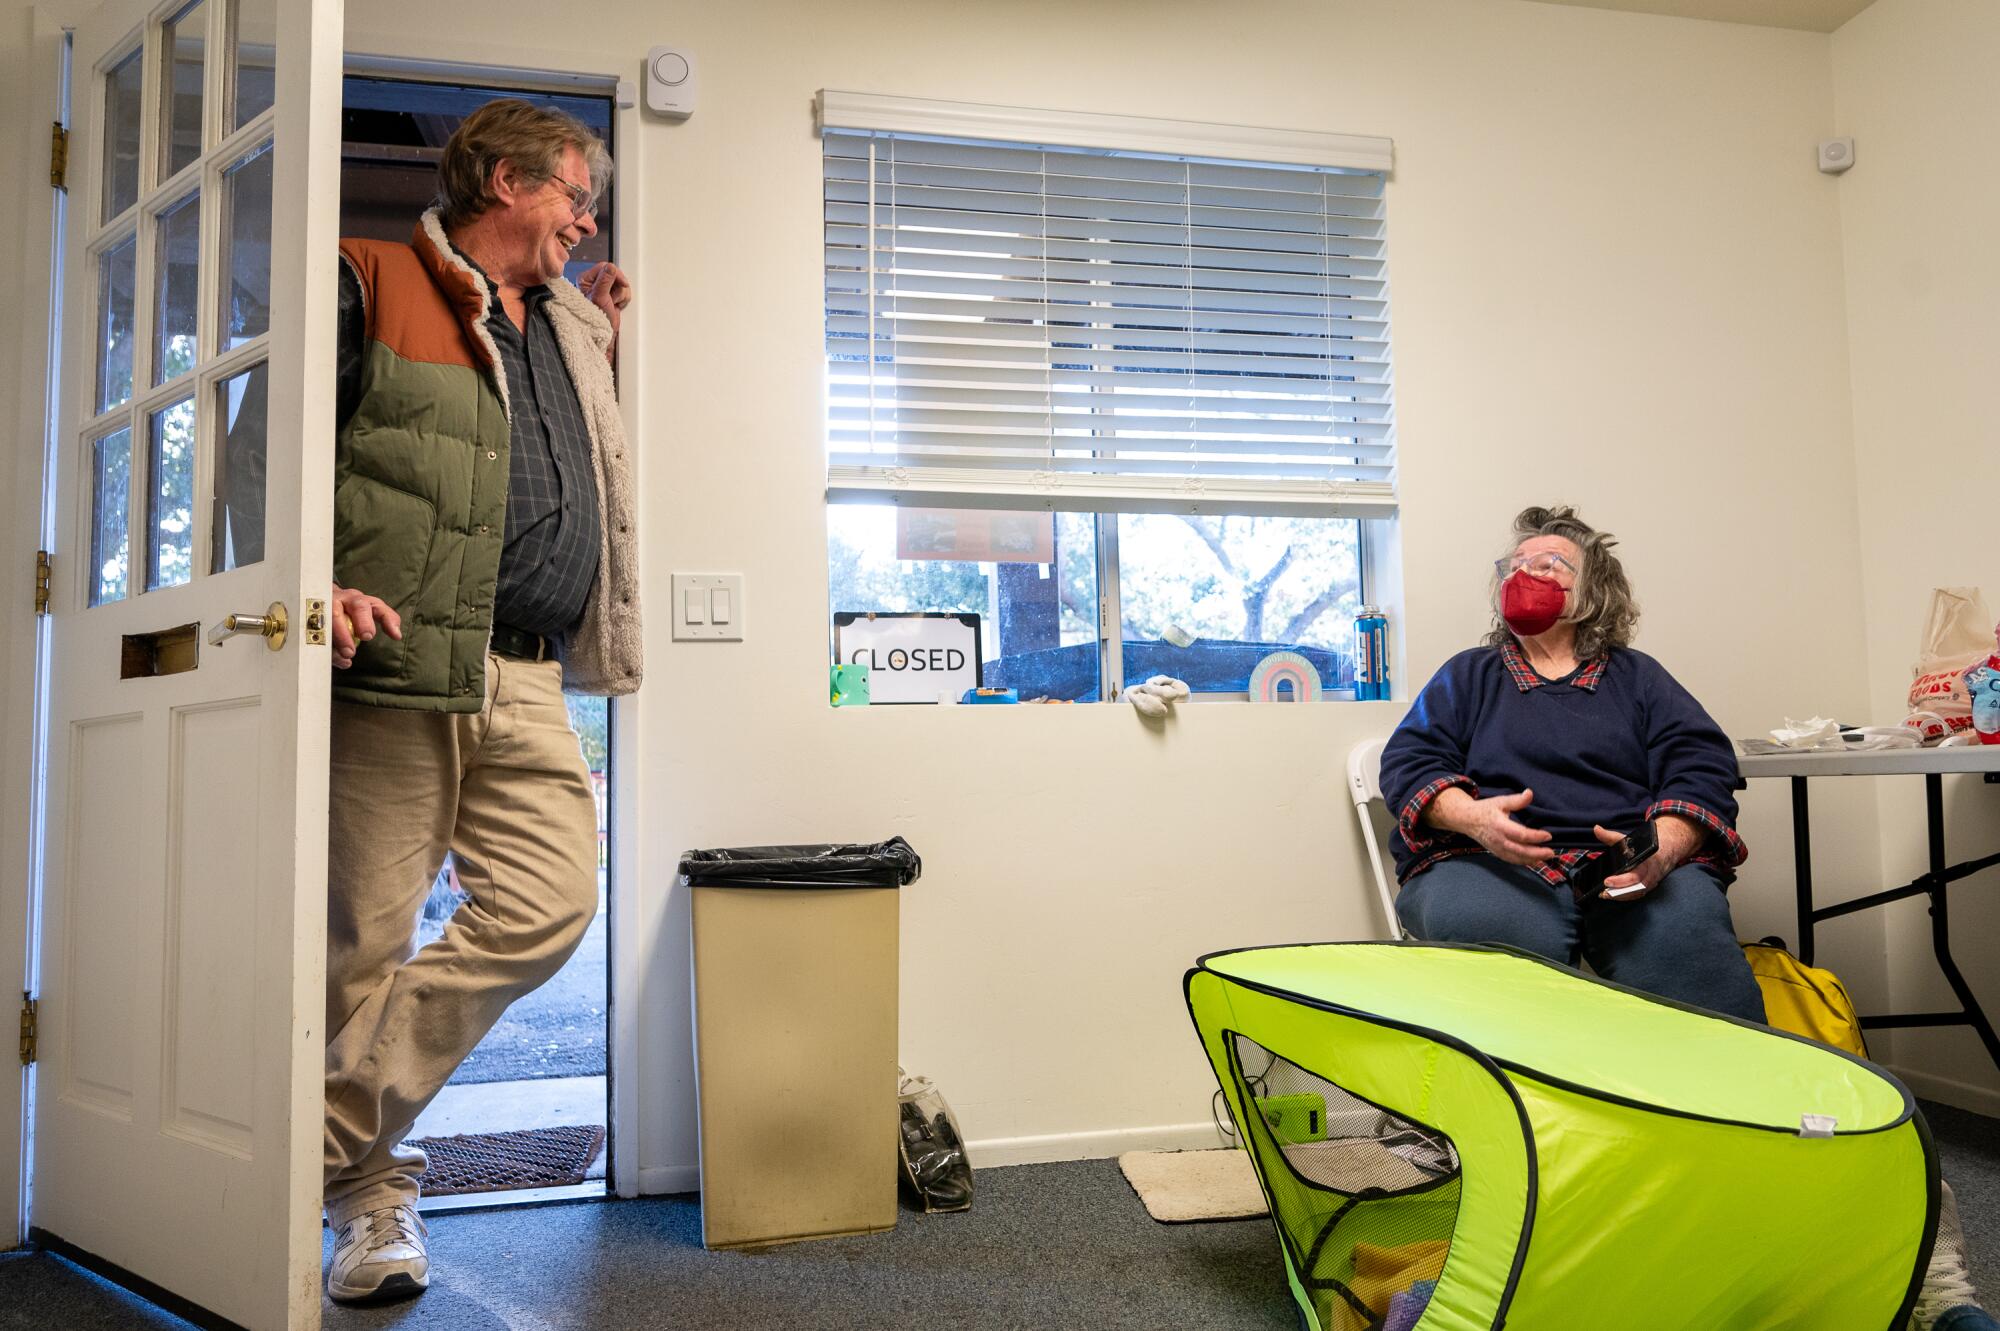 A man and woman converse in a community room at Ojai's homeless encampment.